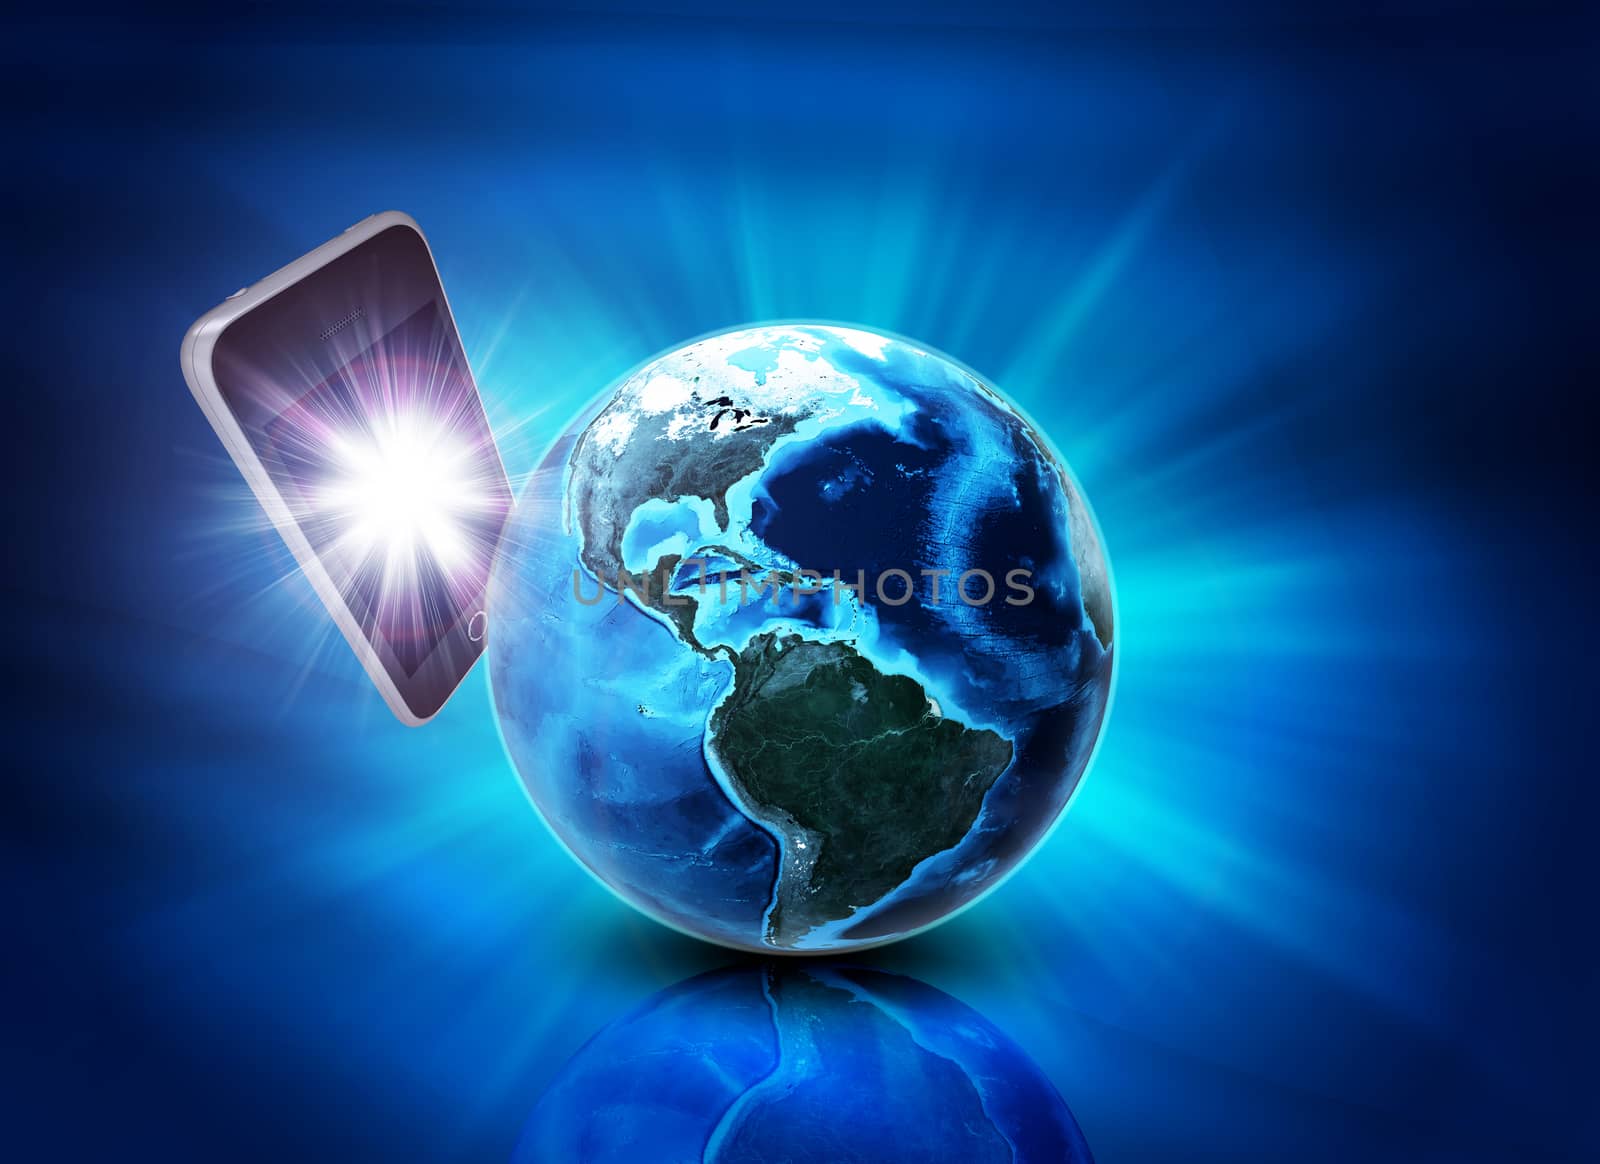 Mobile phone behind earth on abstract blue background. Elements of this image furnished by NASA